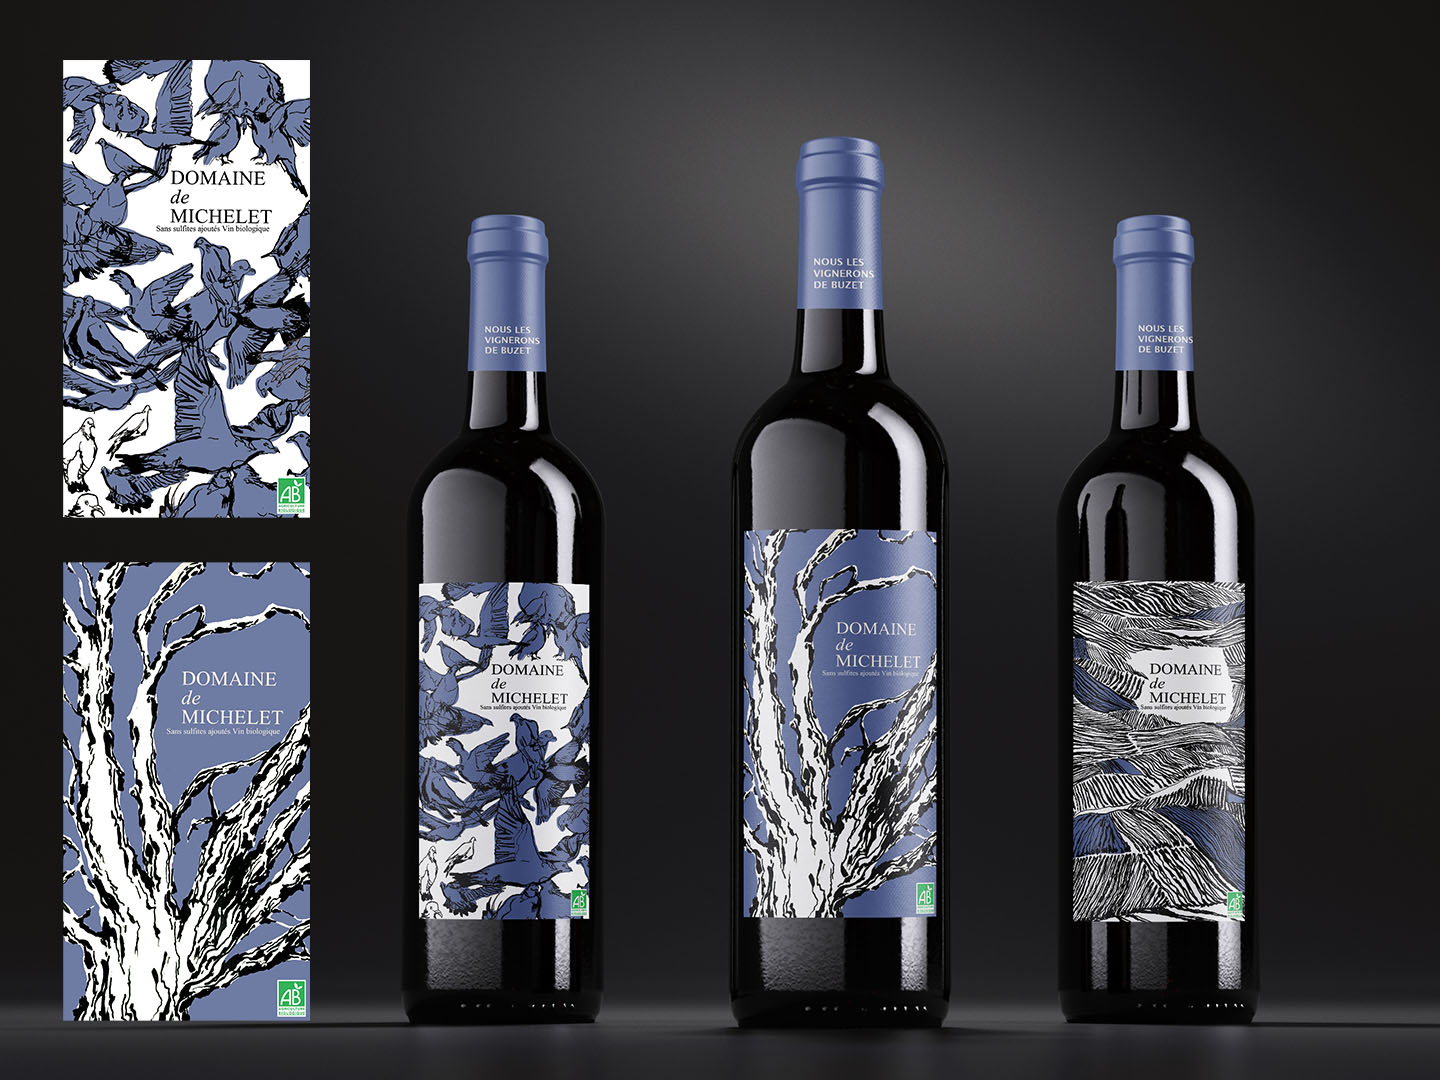 Three wine bottles with illustrated labels featuring birds, trees and vineyards